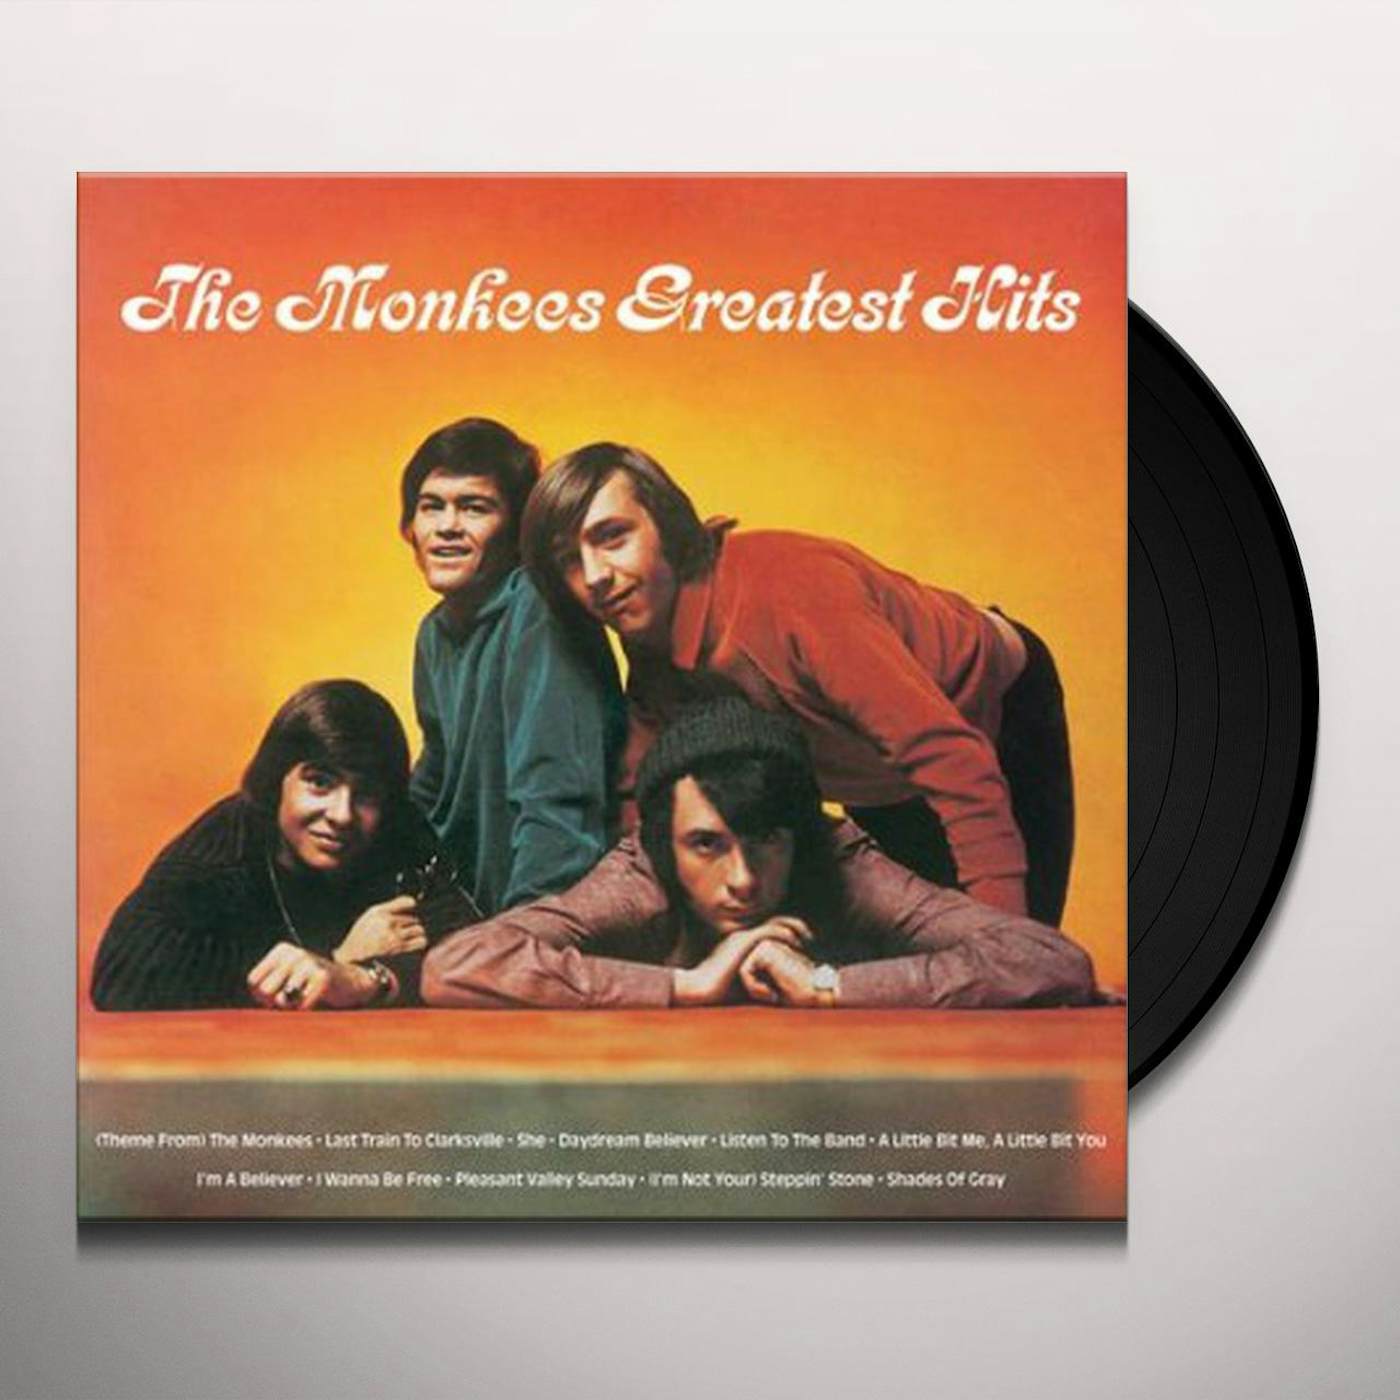 The Monkees Greatest Hits Vinyl Record